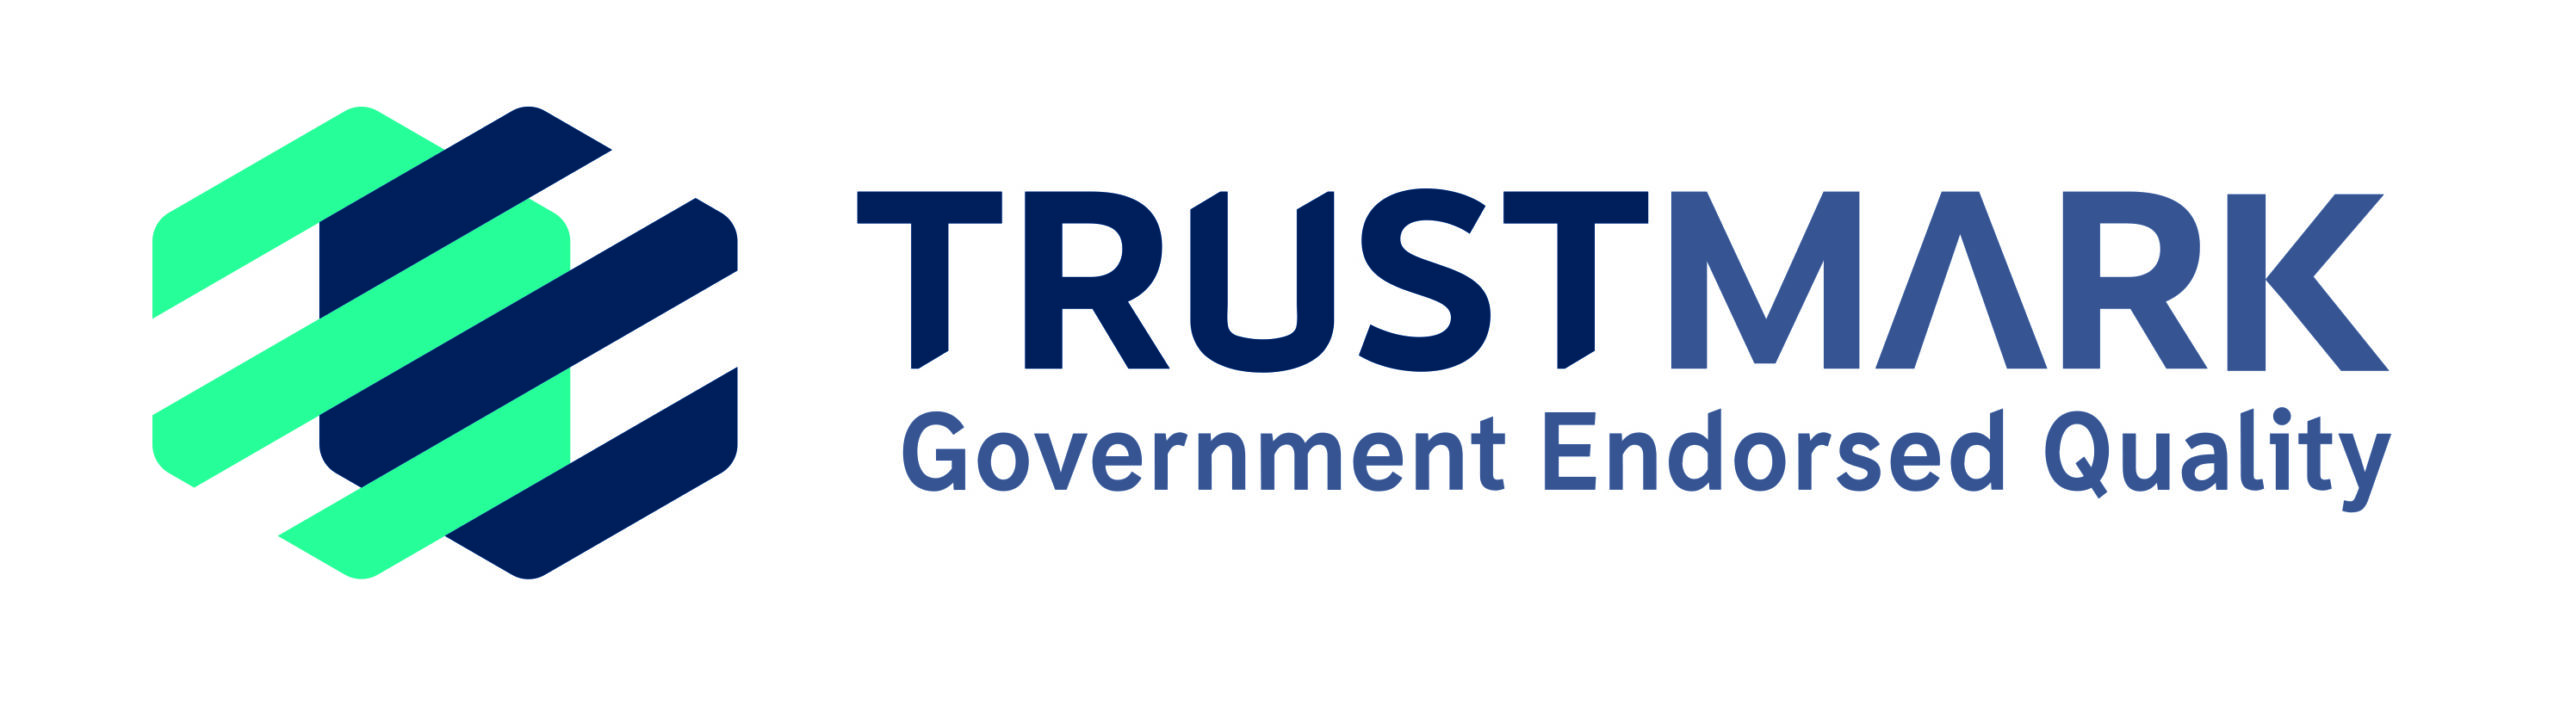 C A Services are now Trustmark registered for our Renewable division